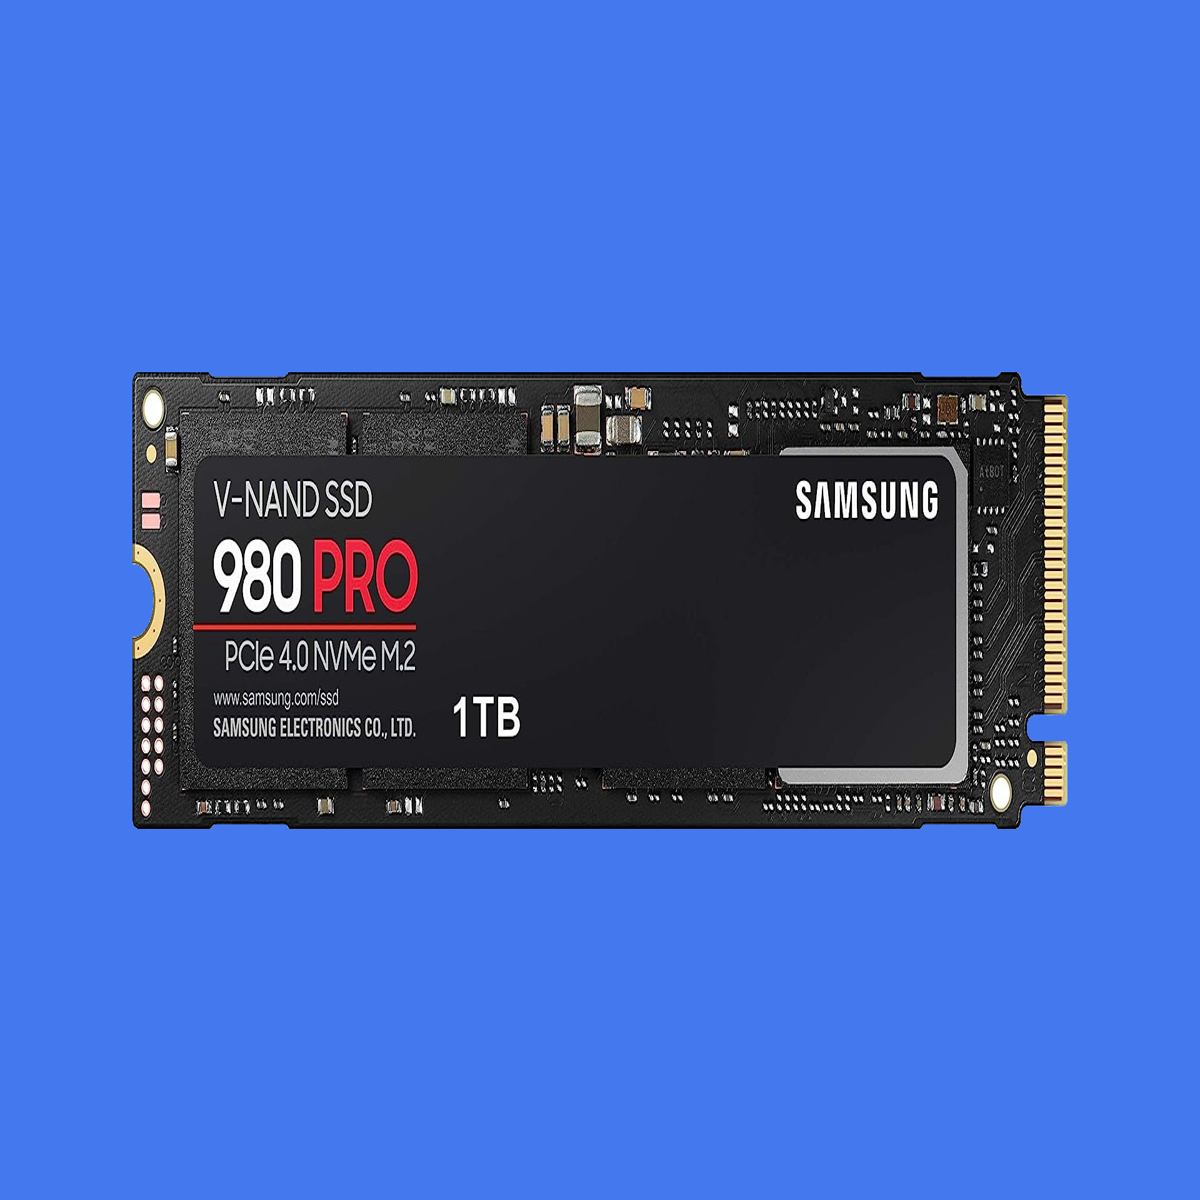 Samsung SSD 980 PRO PCle 4.0 NVMe M.2 on motherboard background